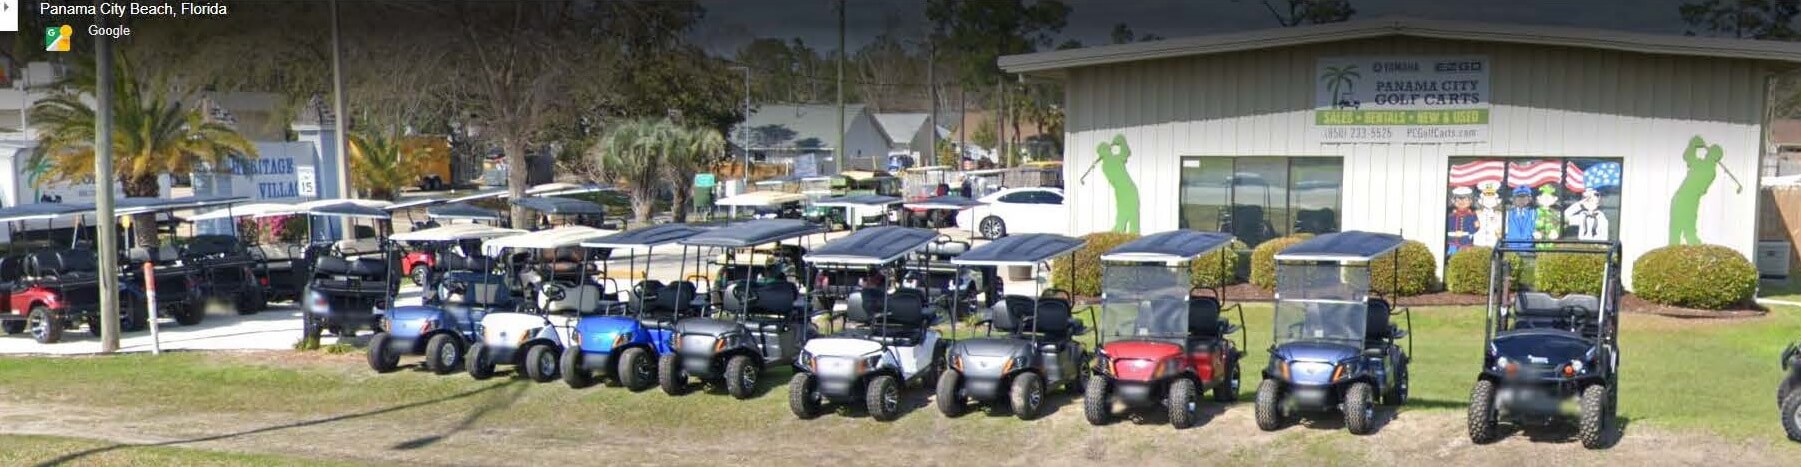 Welcome to Panama City Golf Carts